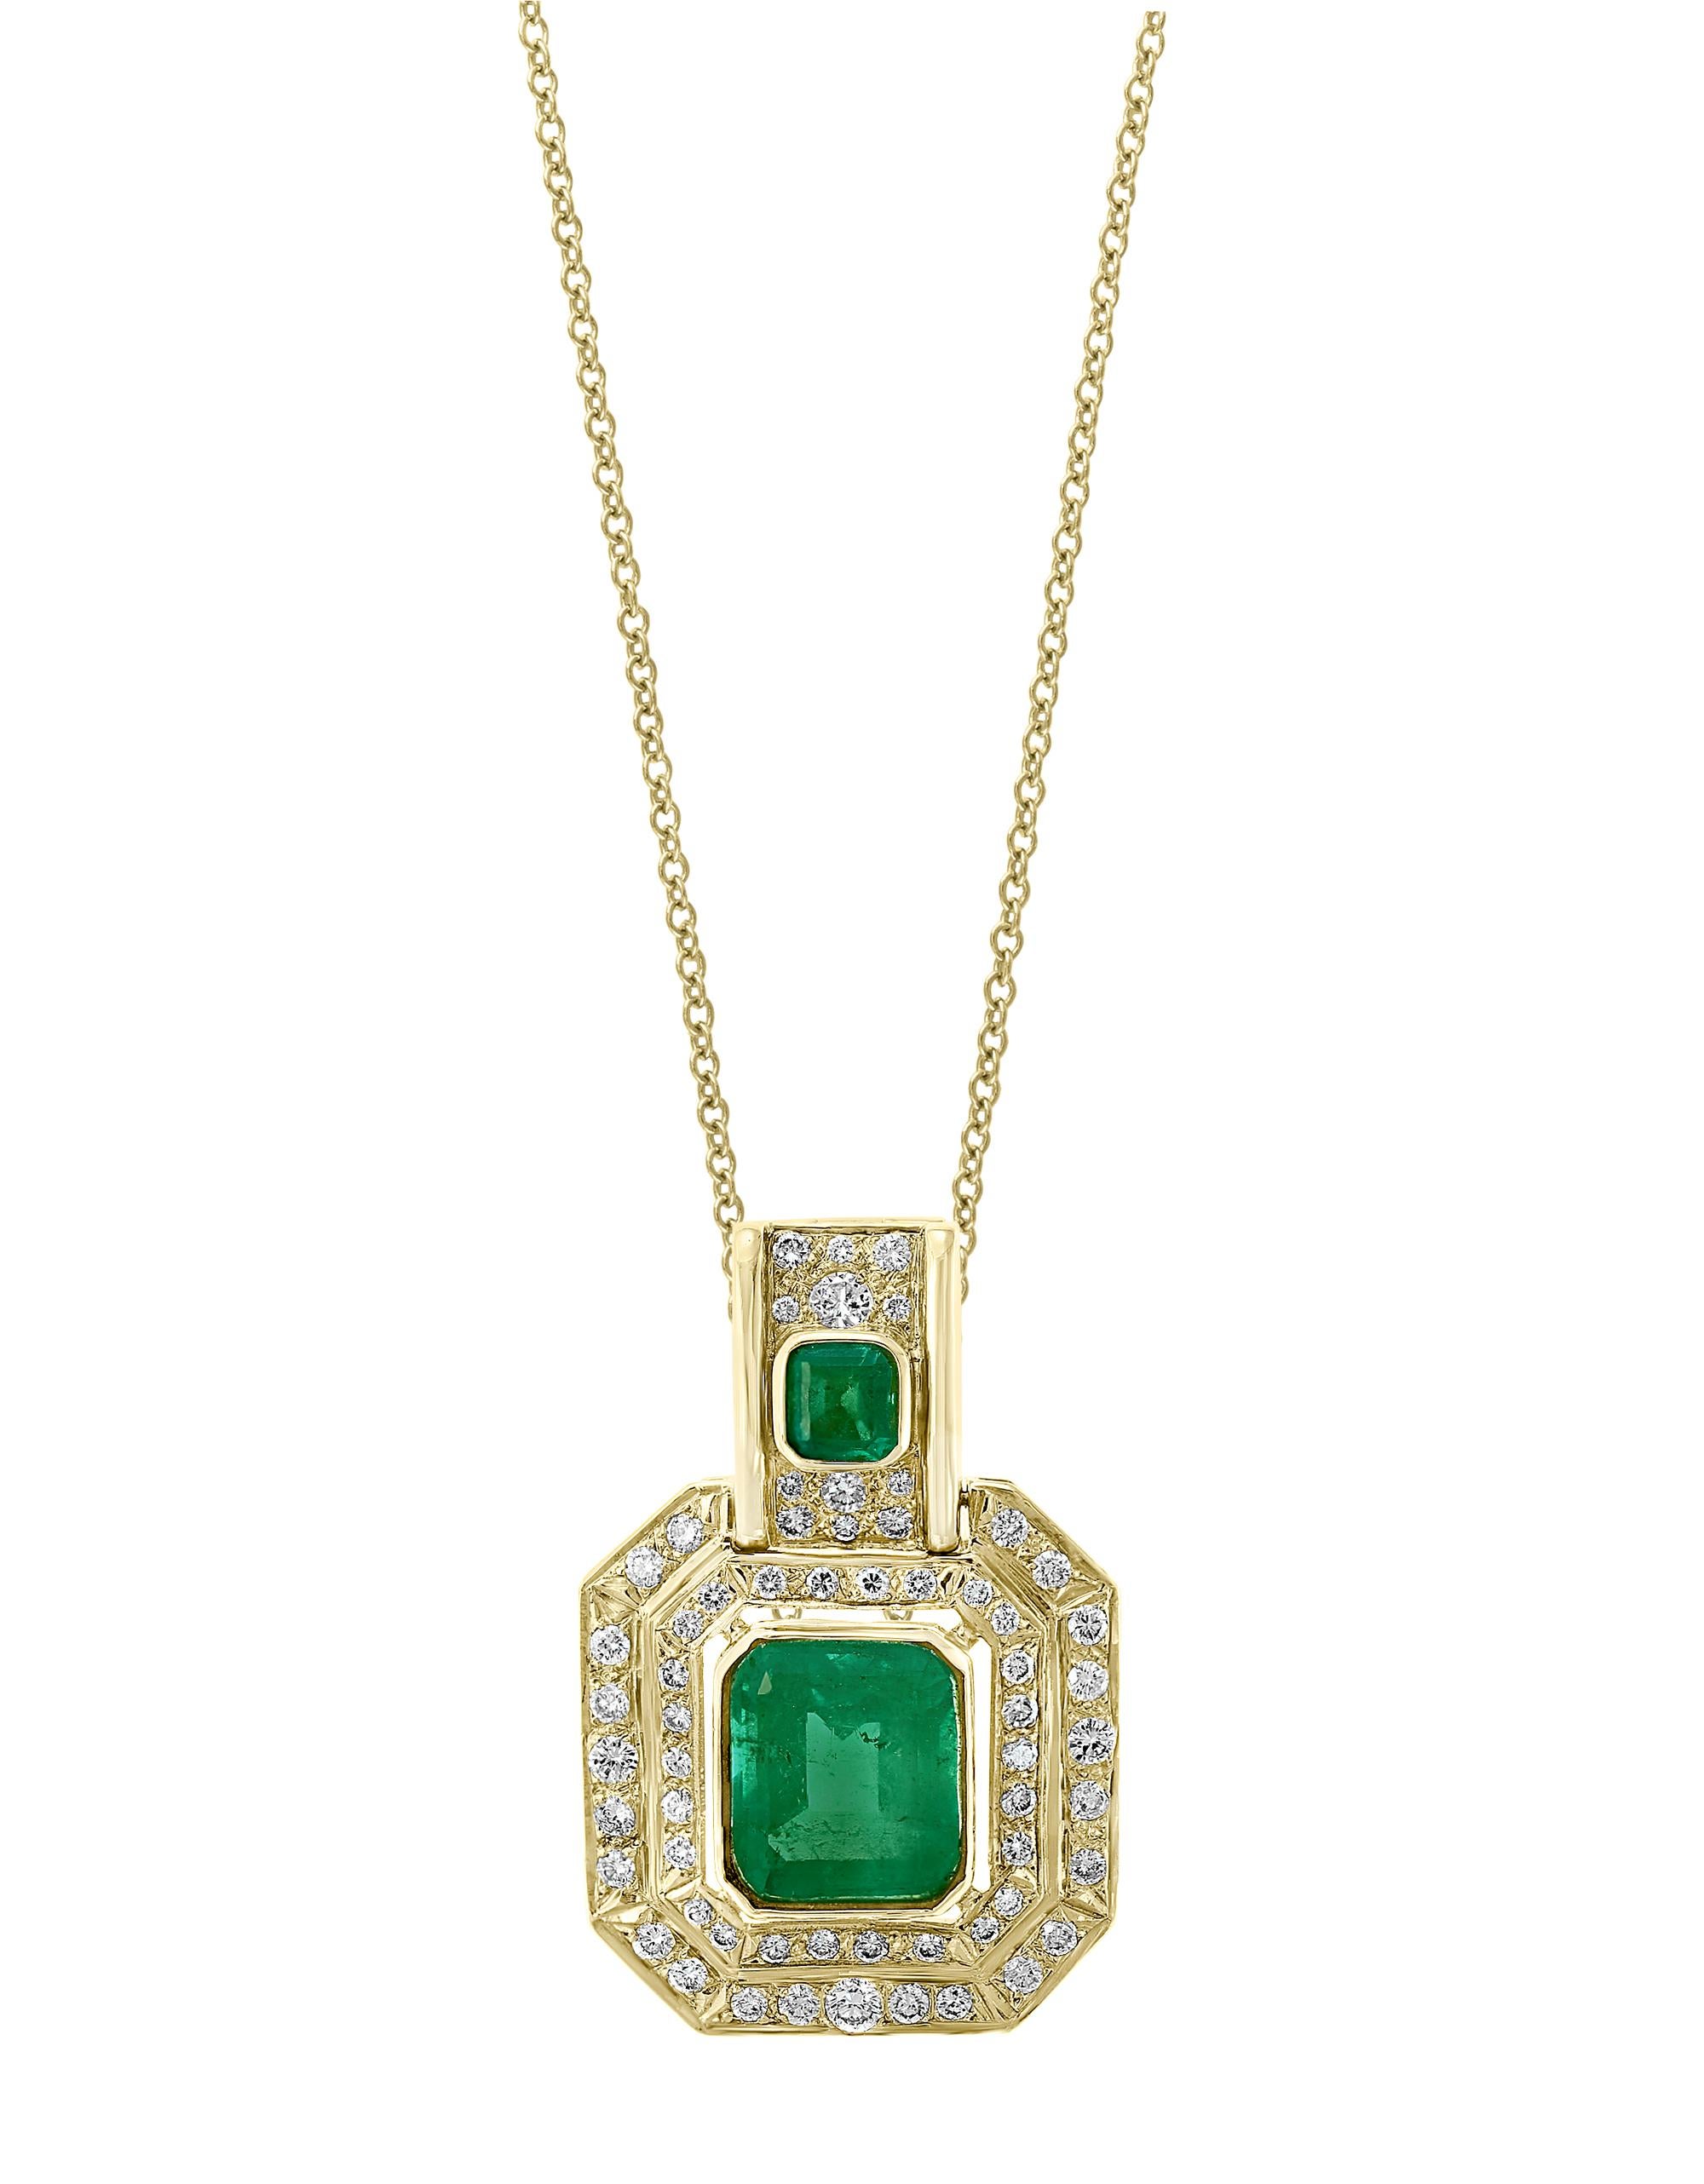 AGL Certified Minor 20 Ct Colombian Emerald & 5 Ct Diamond Pendent/Necklace 14K
20 Carat Colombian Emerald & 5 Ct Diamond Pendent/Necklace 14 Karat Gold Estate
Gold: 14 Karat yellow gold 
Weight: 31 gm  (does not include weight of the chain)
